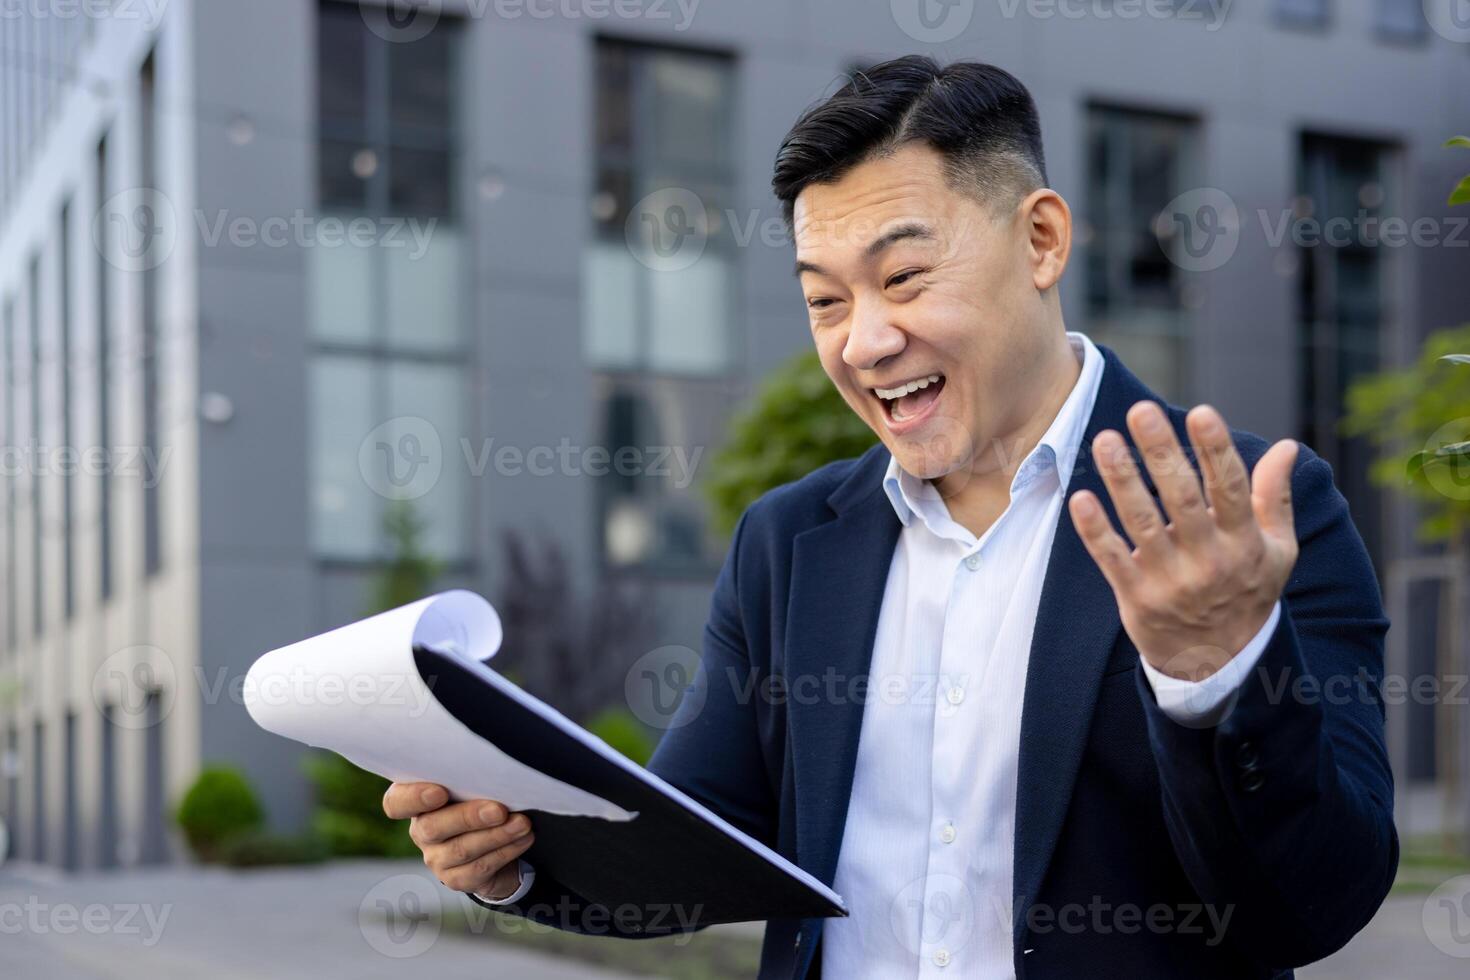 Professional man in a suit outside office buildings gesturing to stop while holding paperwork. photo